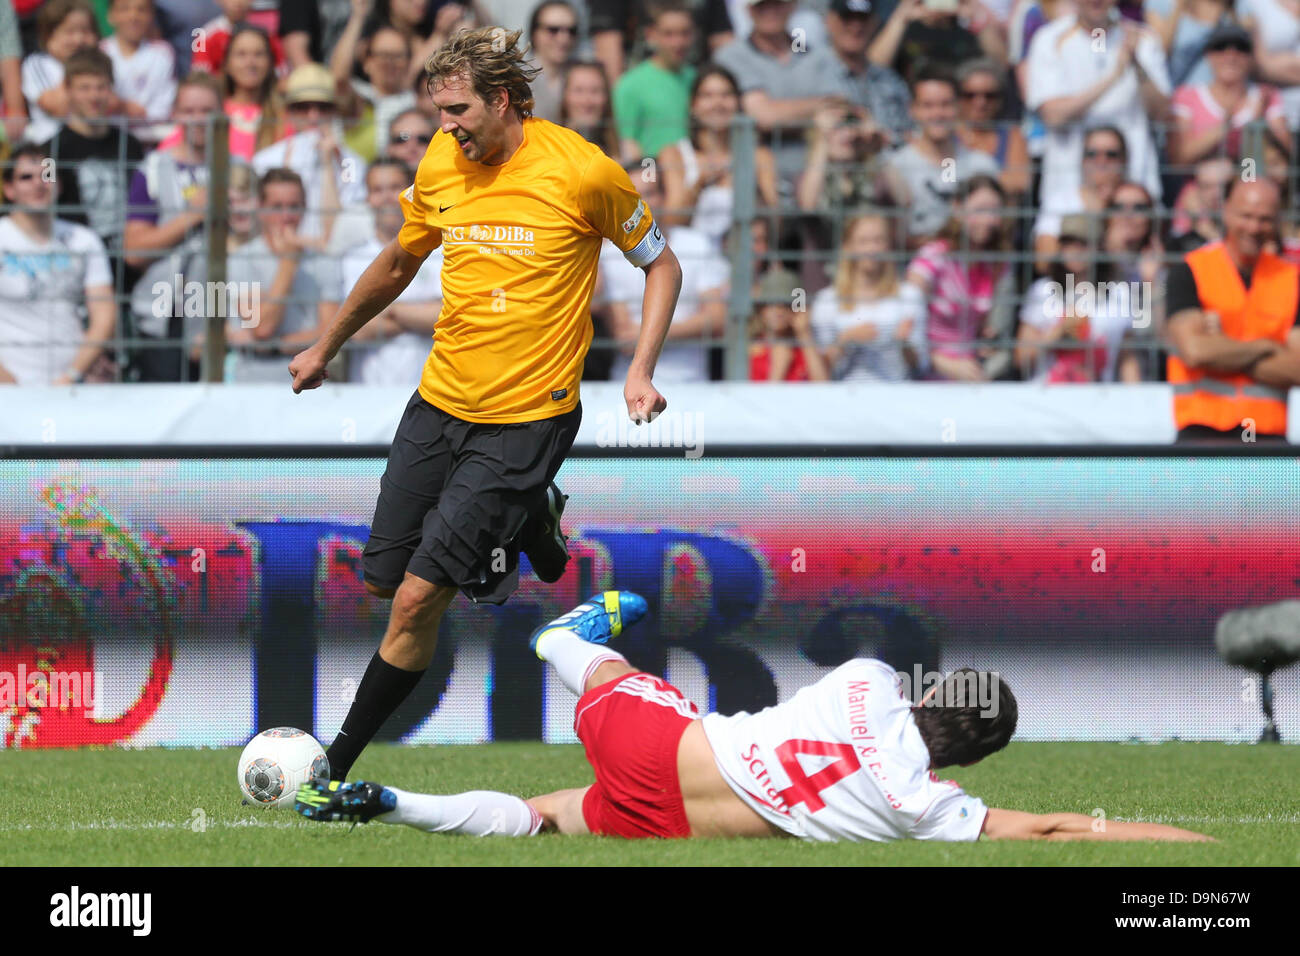 Basketball player Dirk Nowitzki (L) vies for the ball with Marcel Schaefer (ground) during the benefit soccer match between team Manuel Neuer & Friends and Nowitzki Allstars in Wuerzburg, Germany, 23 June 2013. The proceeds from the even go to the project 'Football meets Culture' of the international campaign LitCam. Photo: DANIEL KARMANN Stock Photo